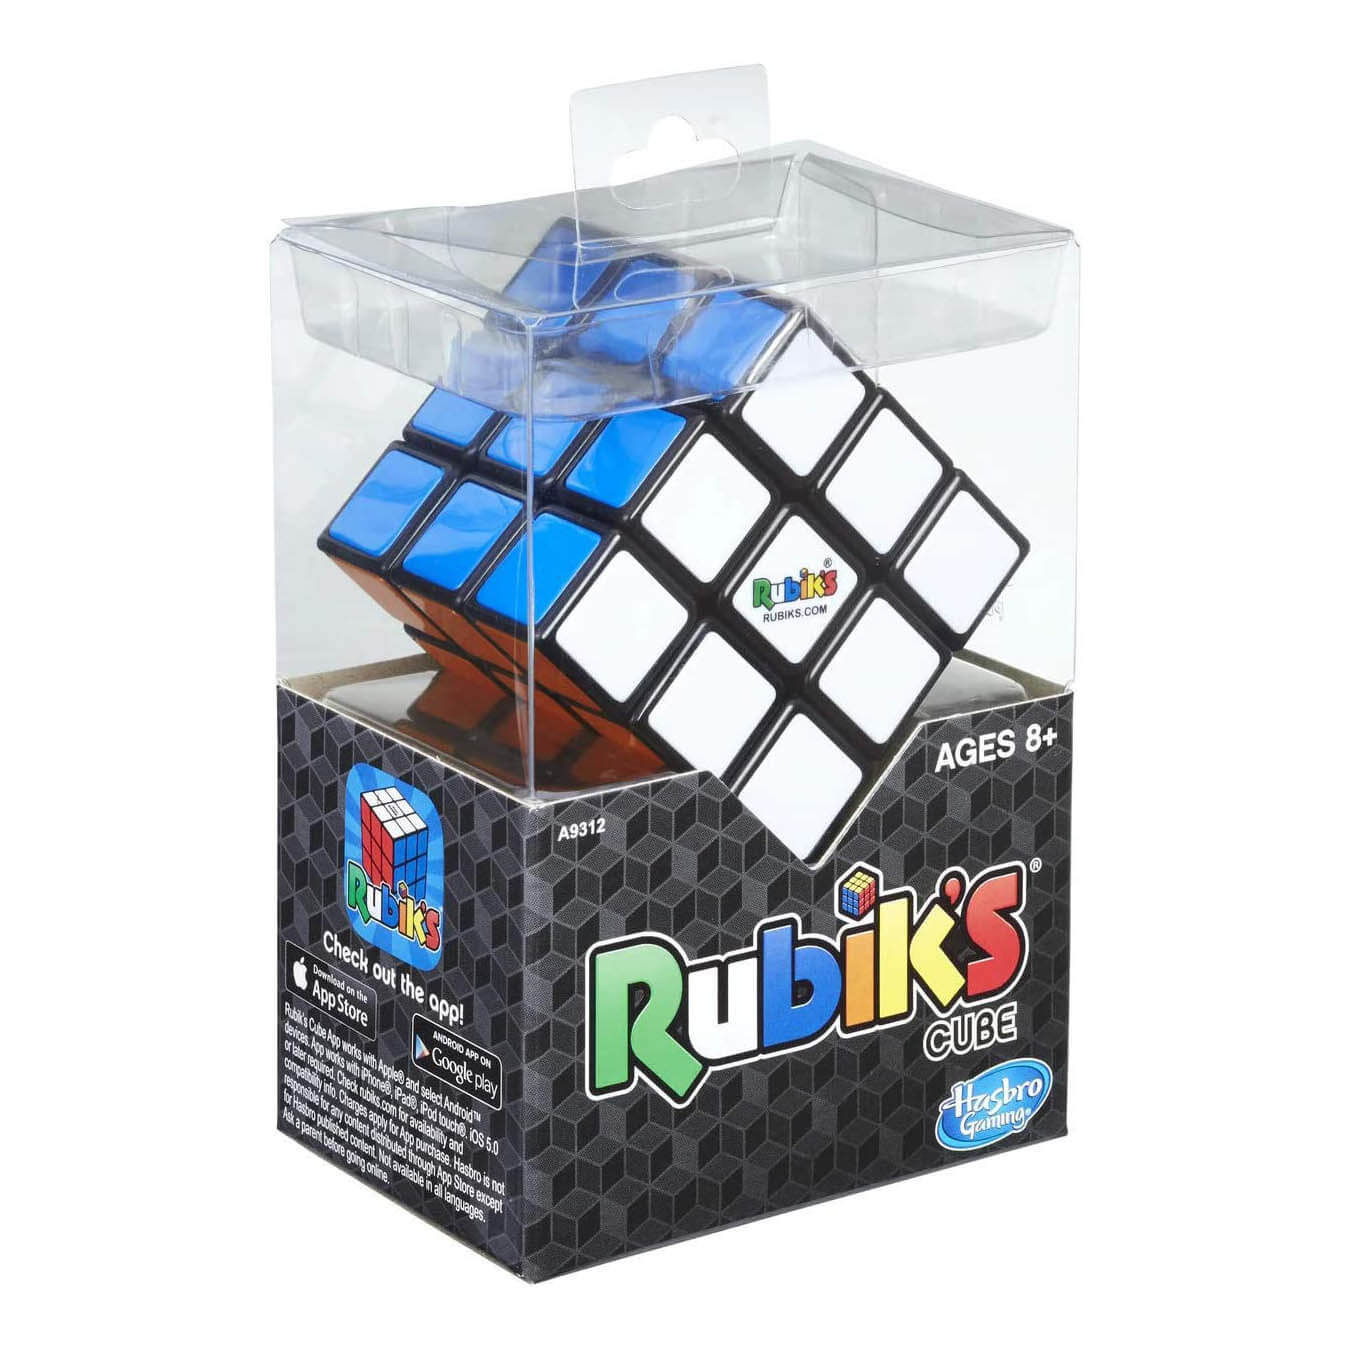 Front view of the Rubik's Cube package.